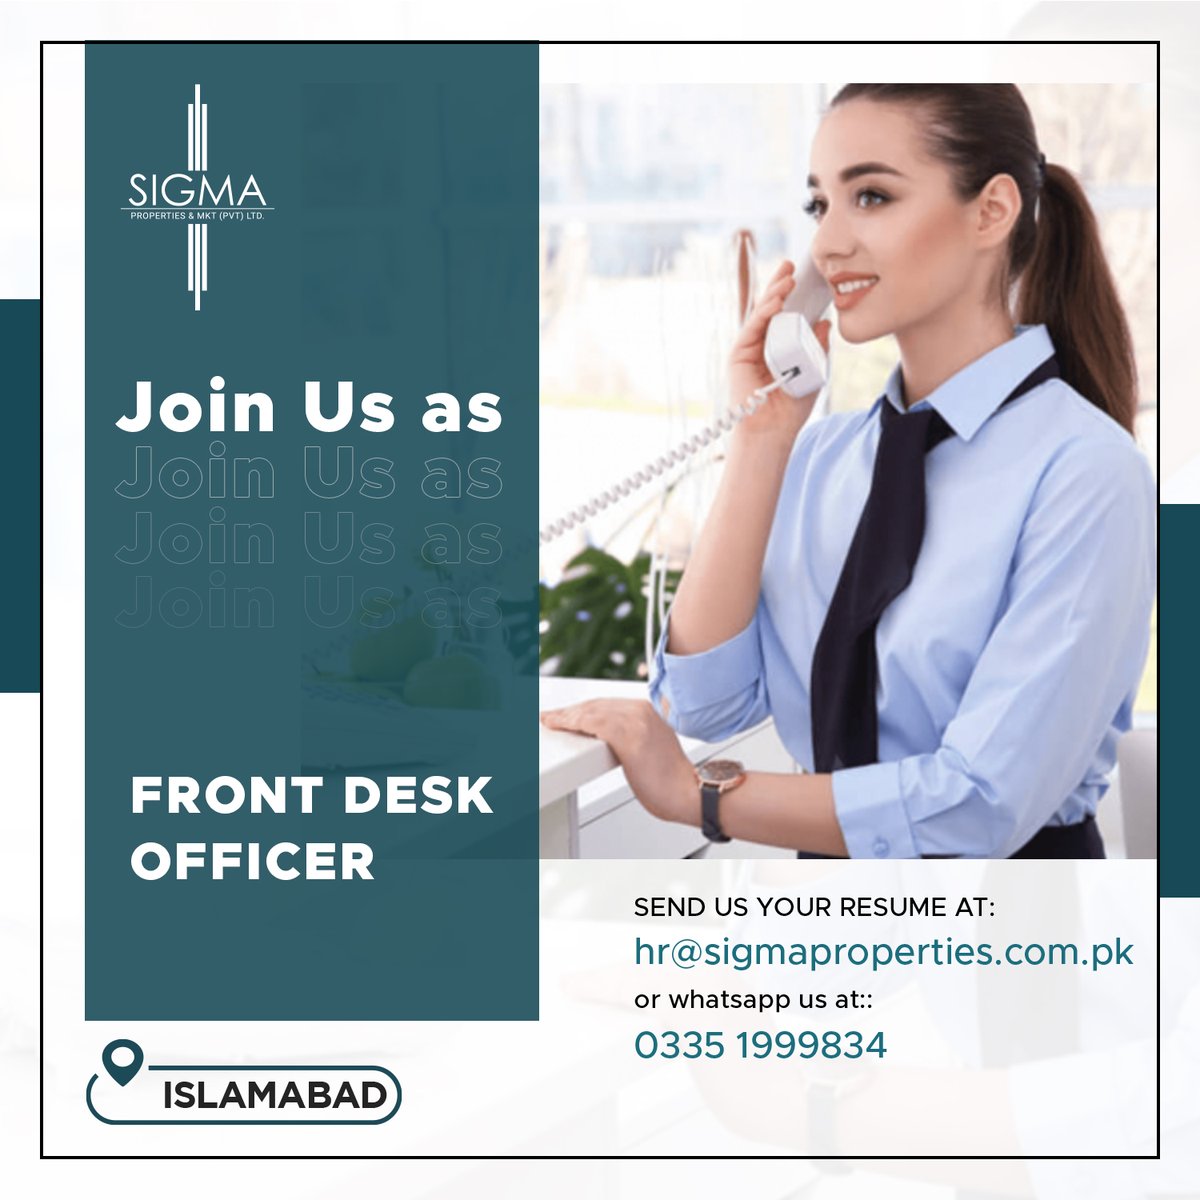 We are Hiring Front Desk Officer
Job vacancy: 1
Female
Interested candidates can send their Resumes on
WhatsApp: 033501999834
#PeopleManagement #HRsolutions #HumanResourceManagement #JobSeekers #Jobsforall #frontdeskofficer #receptionist
#Islamabad #Islamabadjobs #jobsinIslamabad